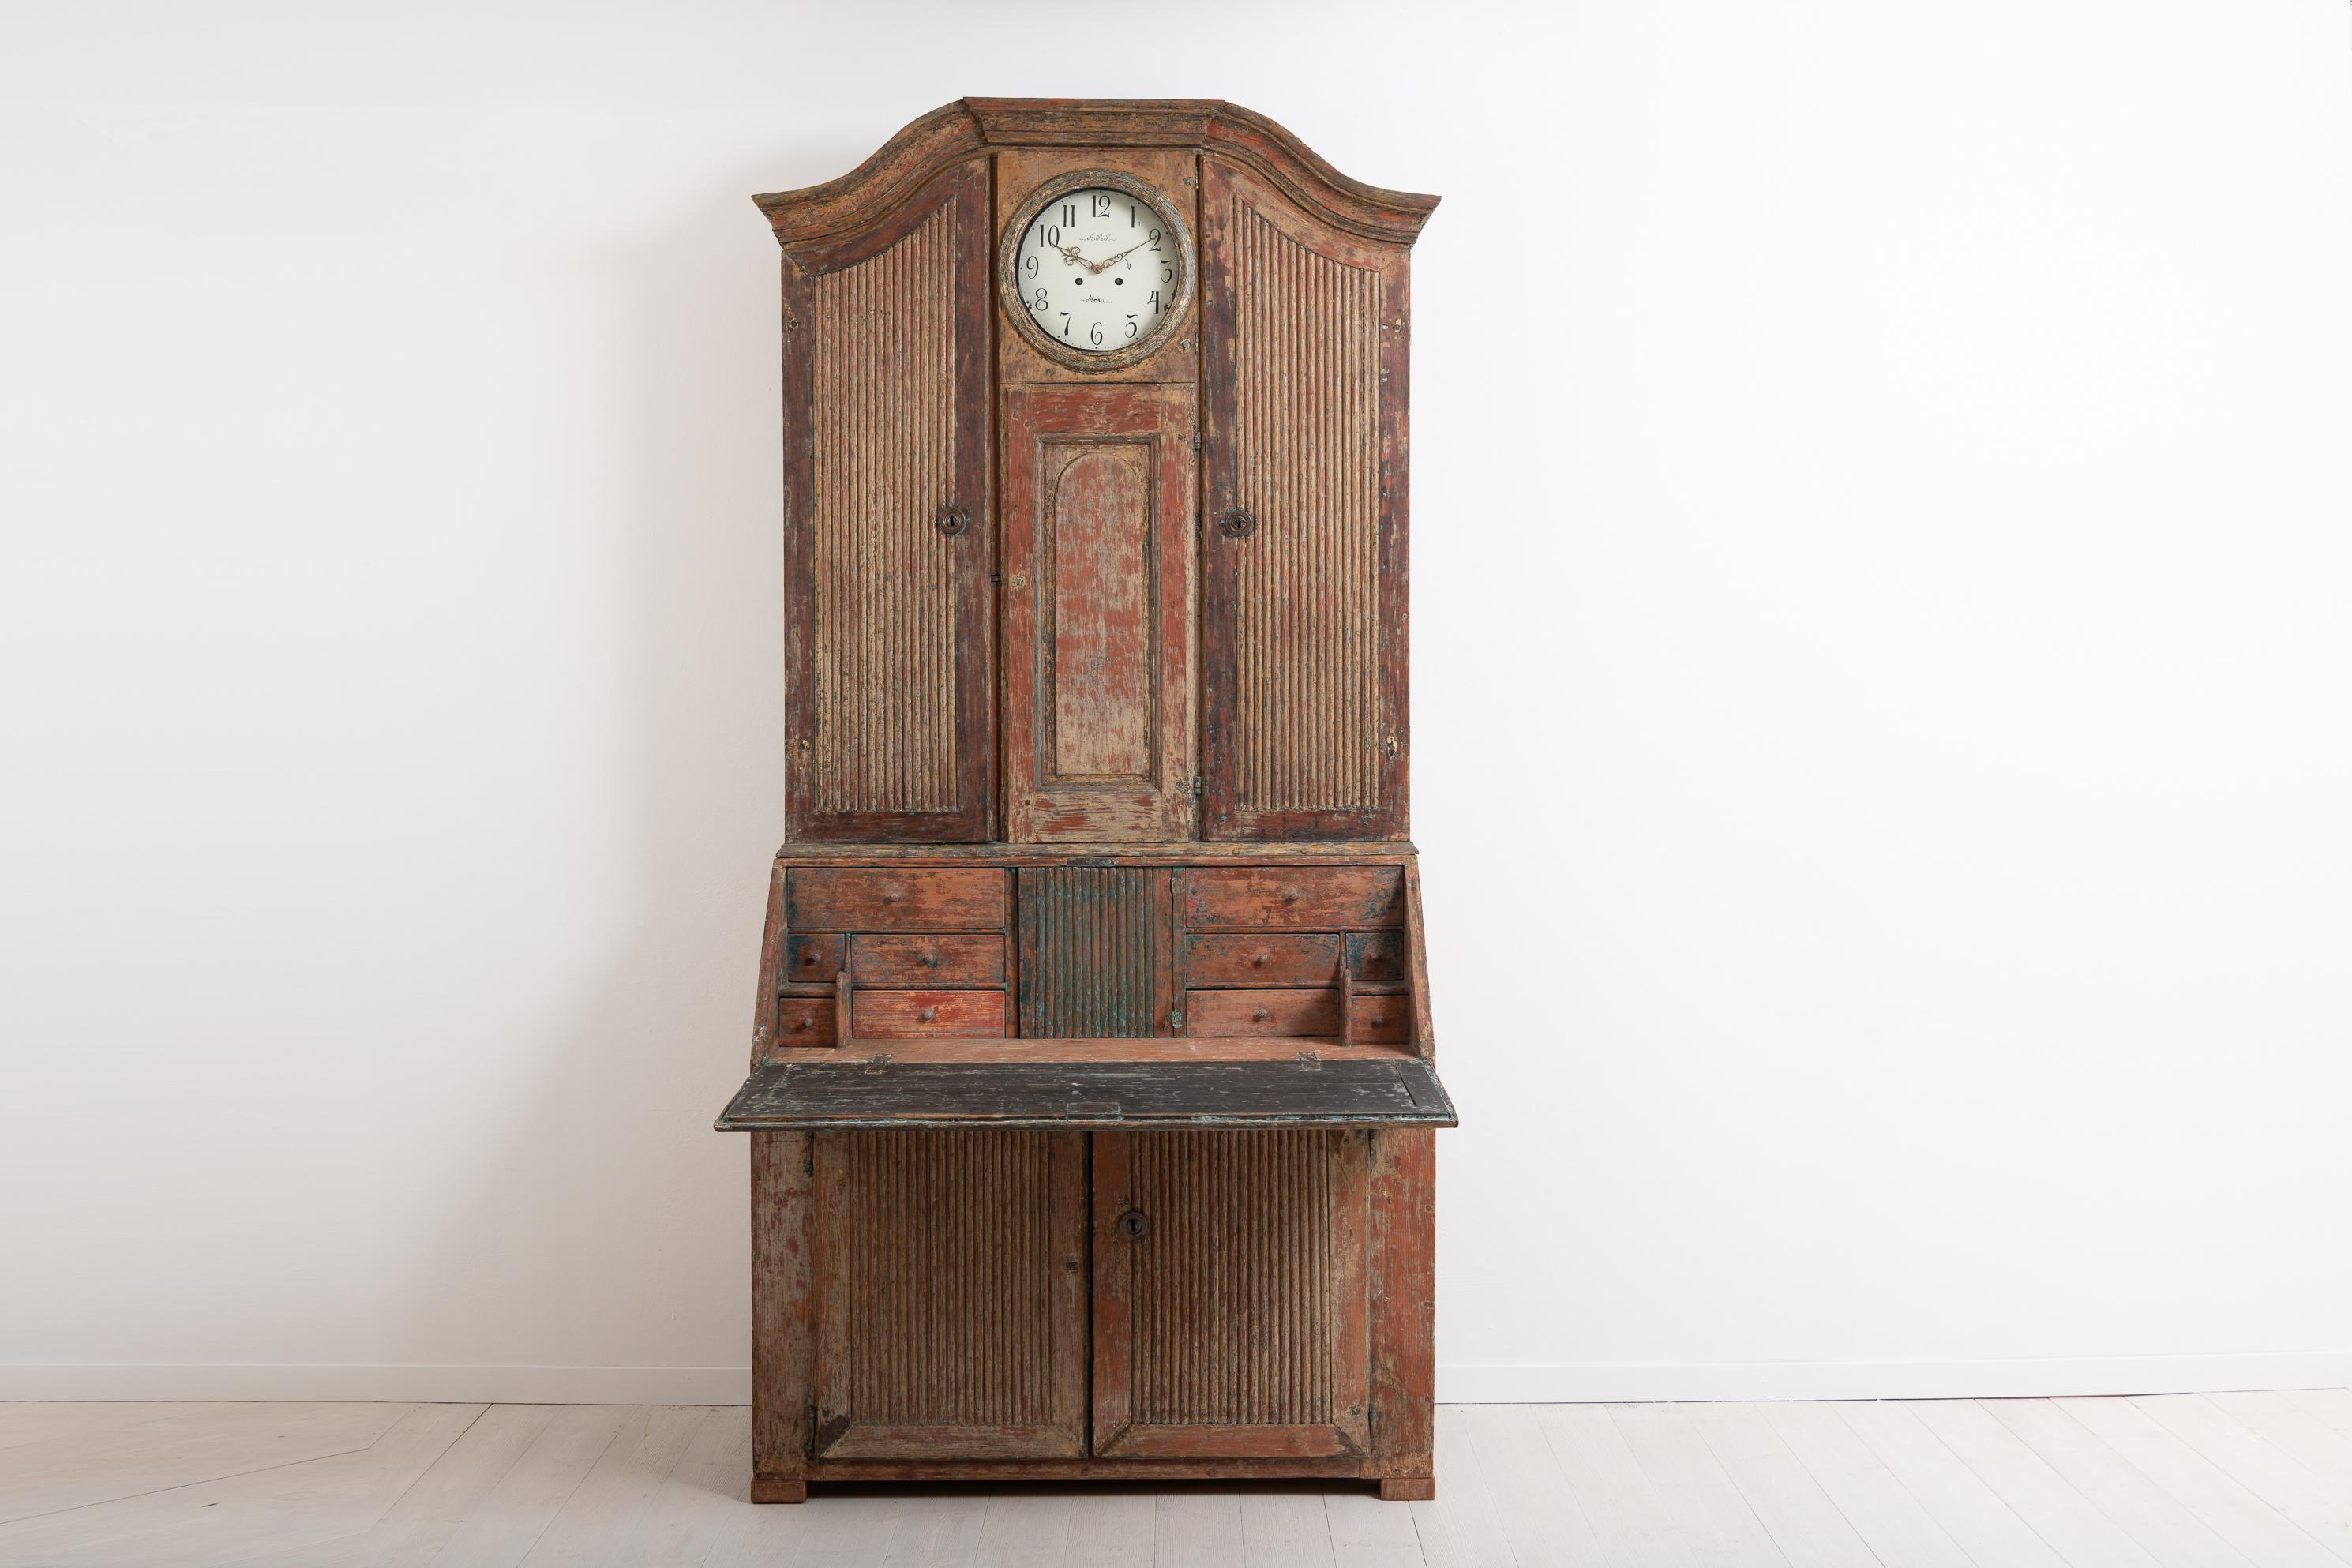 Rococo clock secretary in folk art from northern Sweden. The cabinet - or the secretary - is in two separate pieces and manufactured around the year 1800. It is dry scraped to traces of the original paint and has a rustic patina with natural wear.